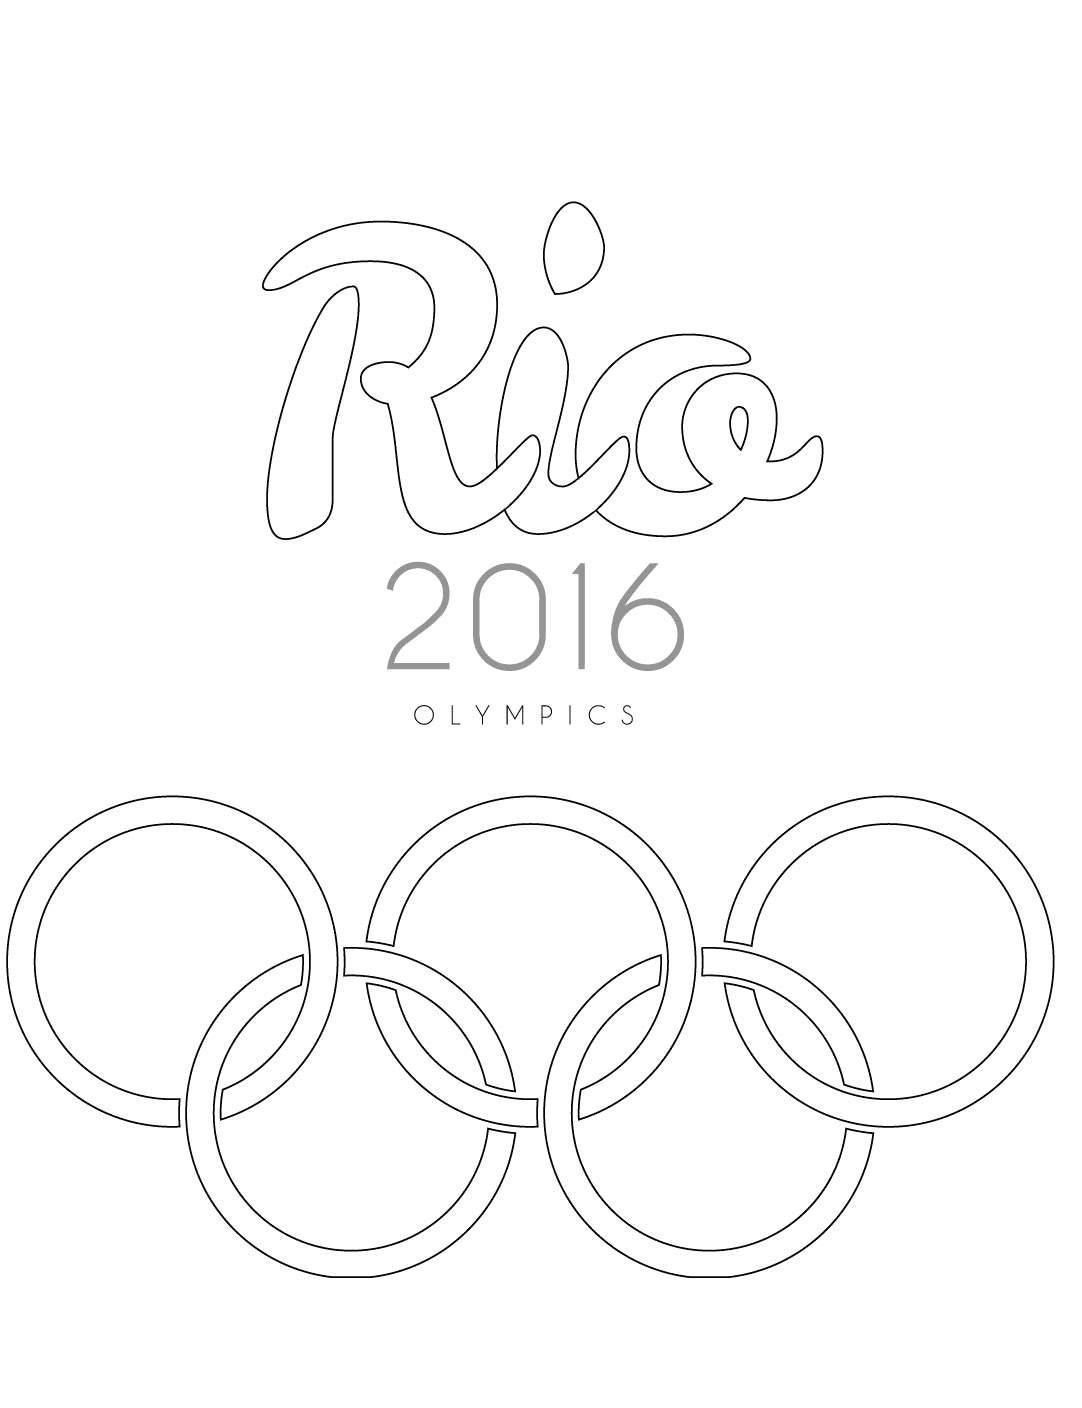 Rio 2016 Olympics coloring page